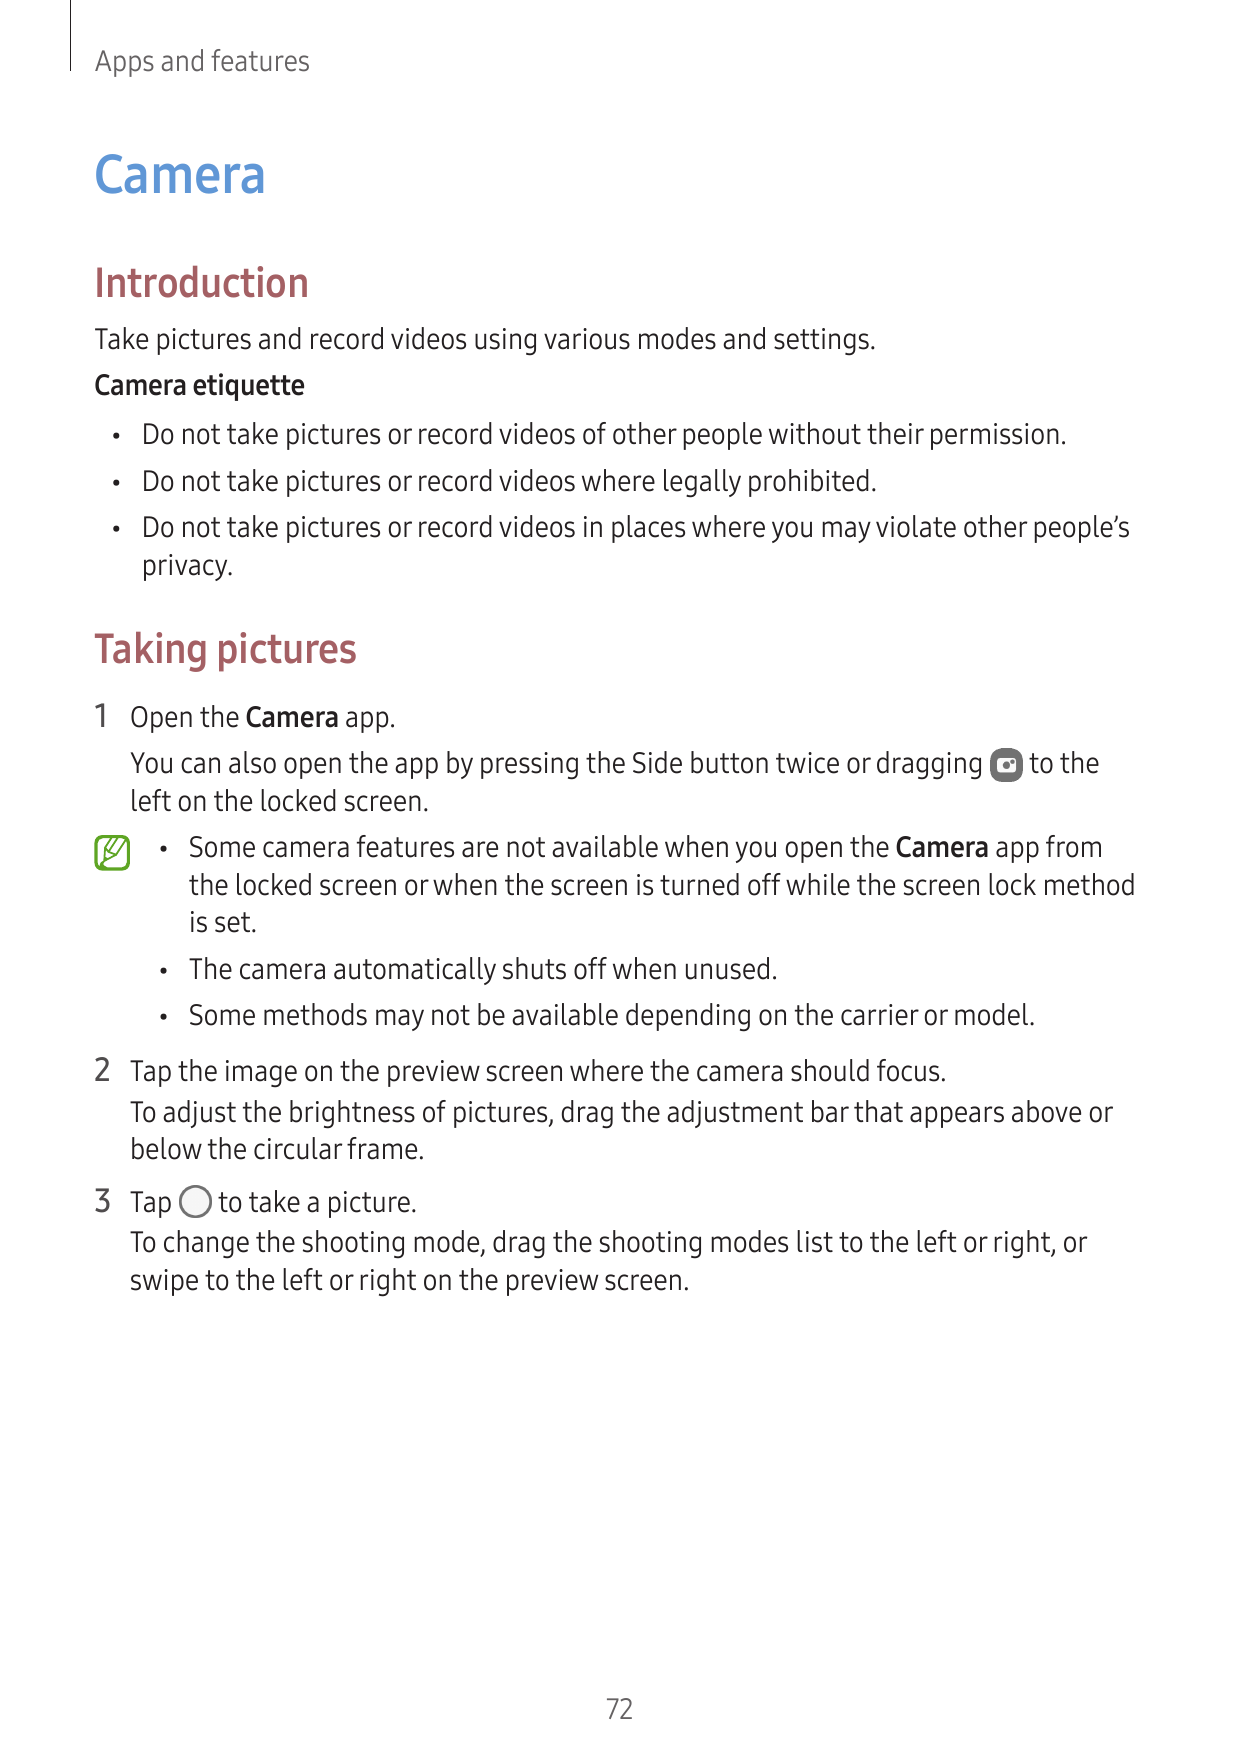 Apps and featuresCameraIntroductionTake pictures and record videos using various modes and settings.Camera etiquette•Do not take